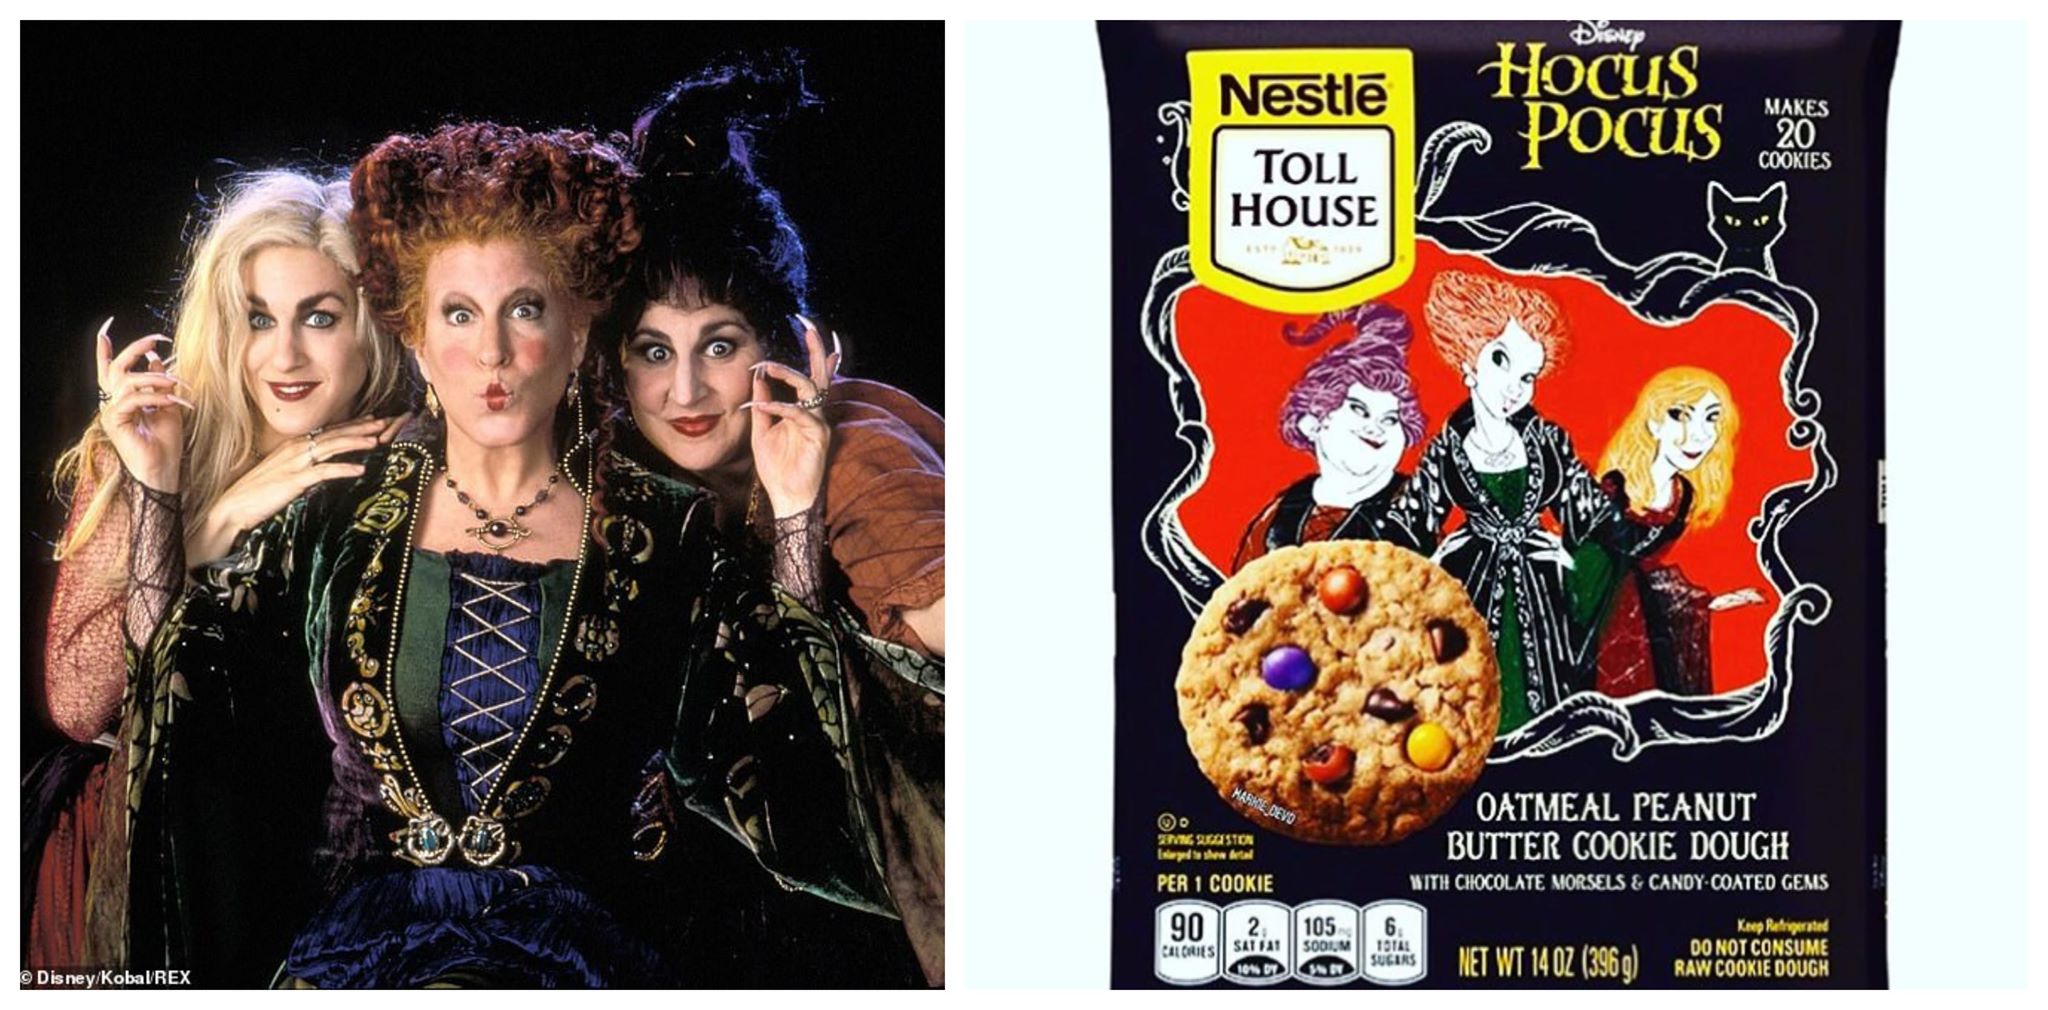 Hocus Pocus Nestle Toll house Cookies are coming to a store near you